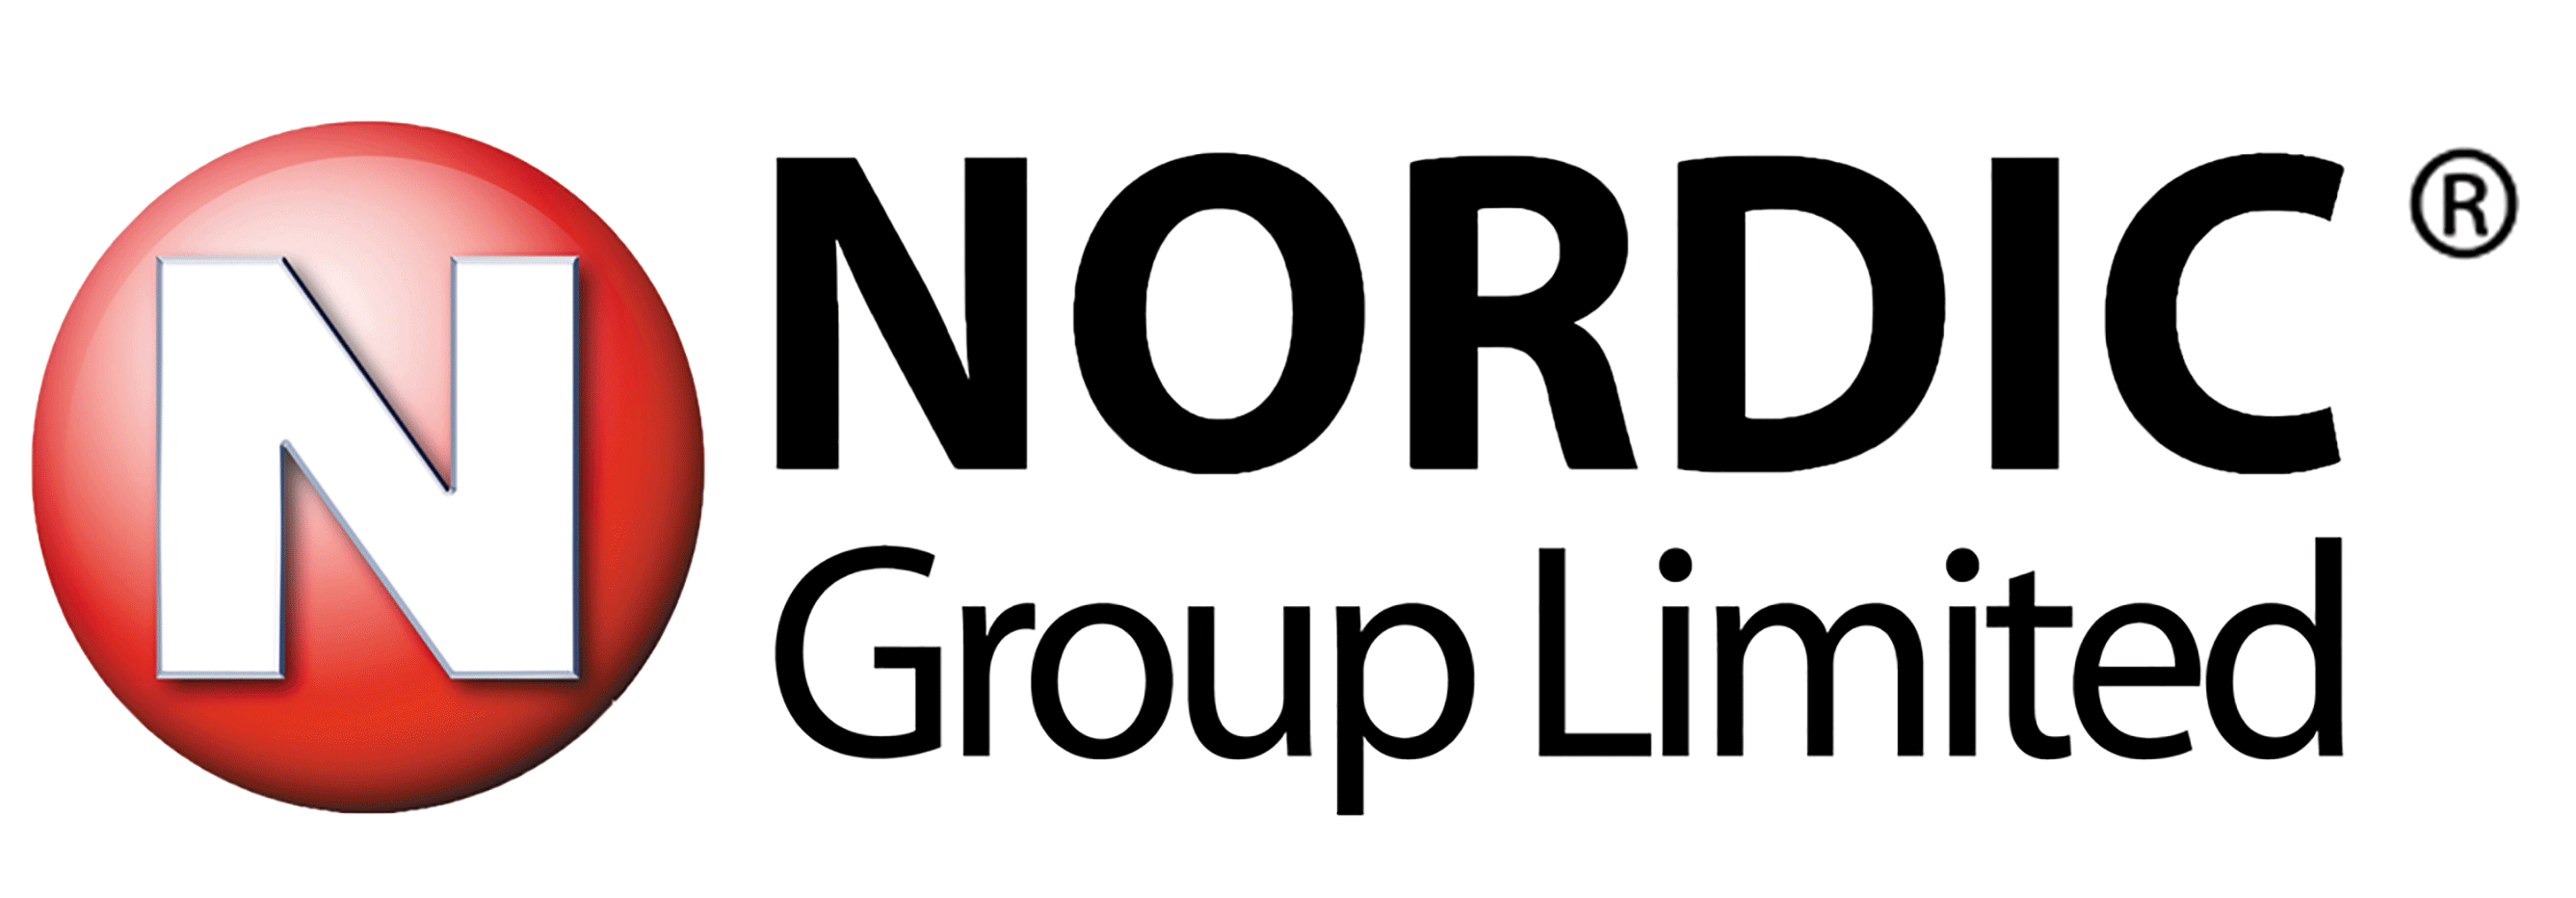 Nordic Group Limited